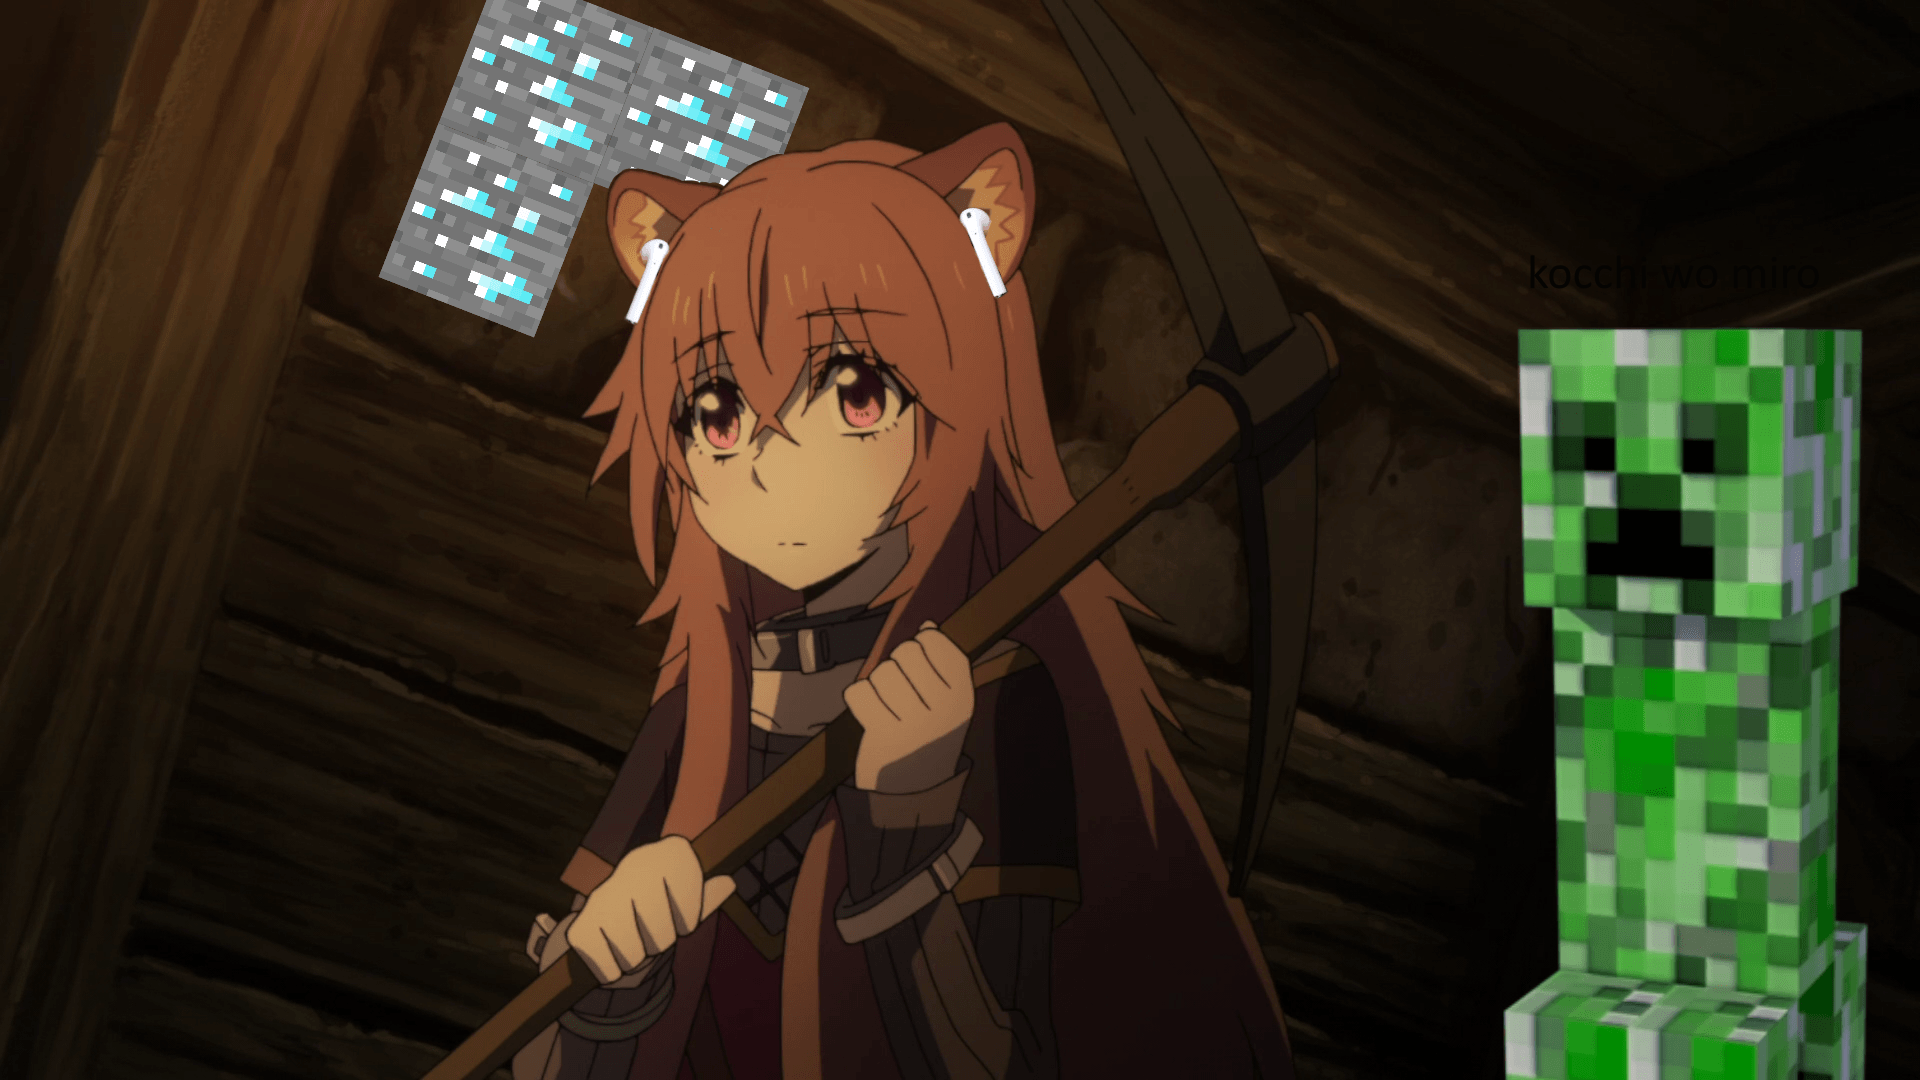 Raphtalia look out behind you there's a creeper oh no she has her